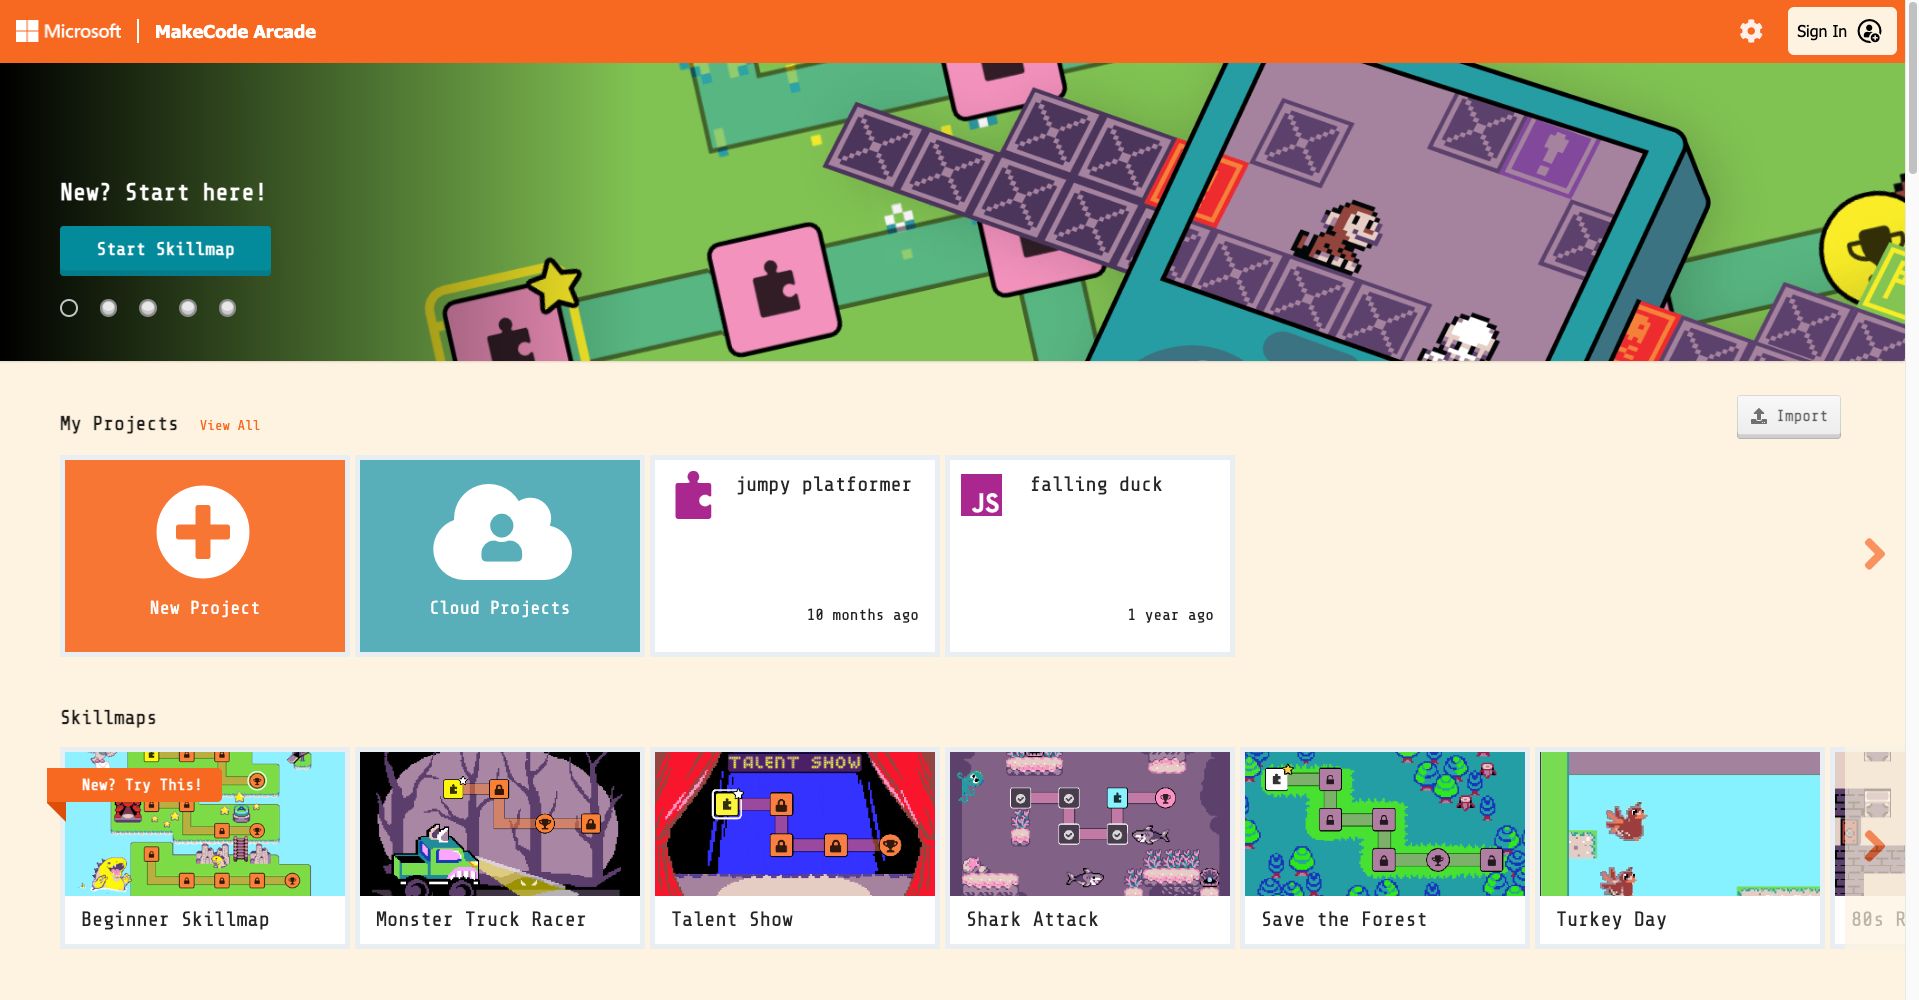 Turning games into full screen web apps - Arcade - Microsoft MakeCode